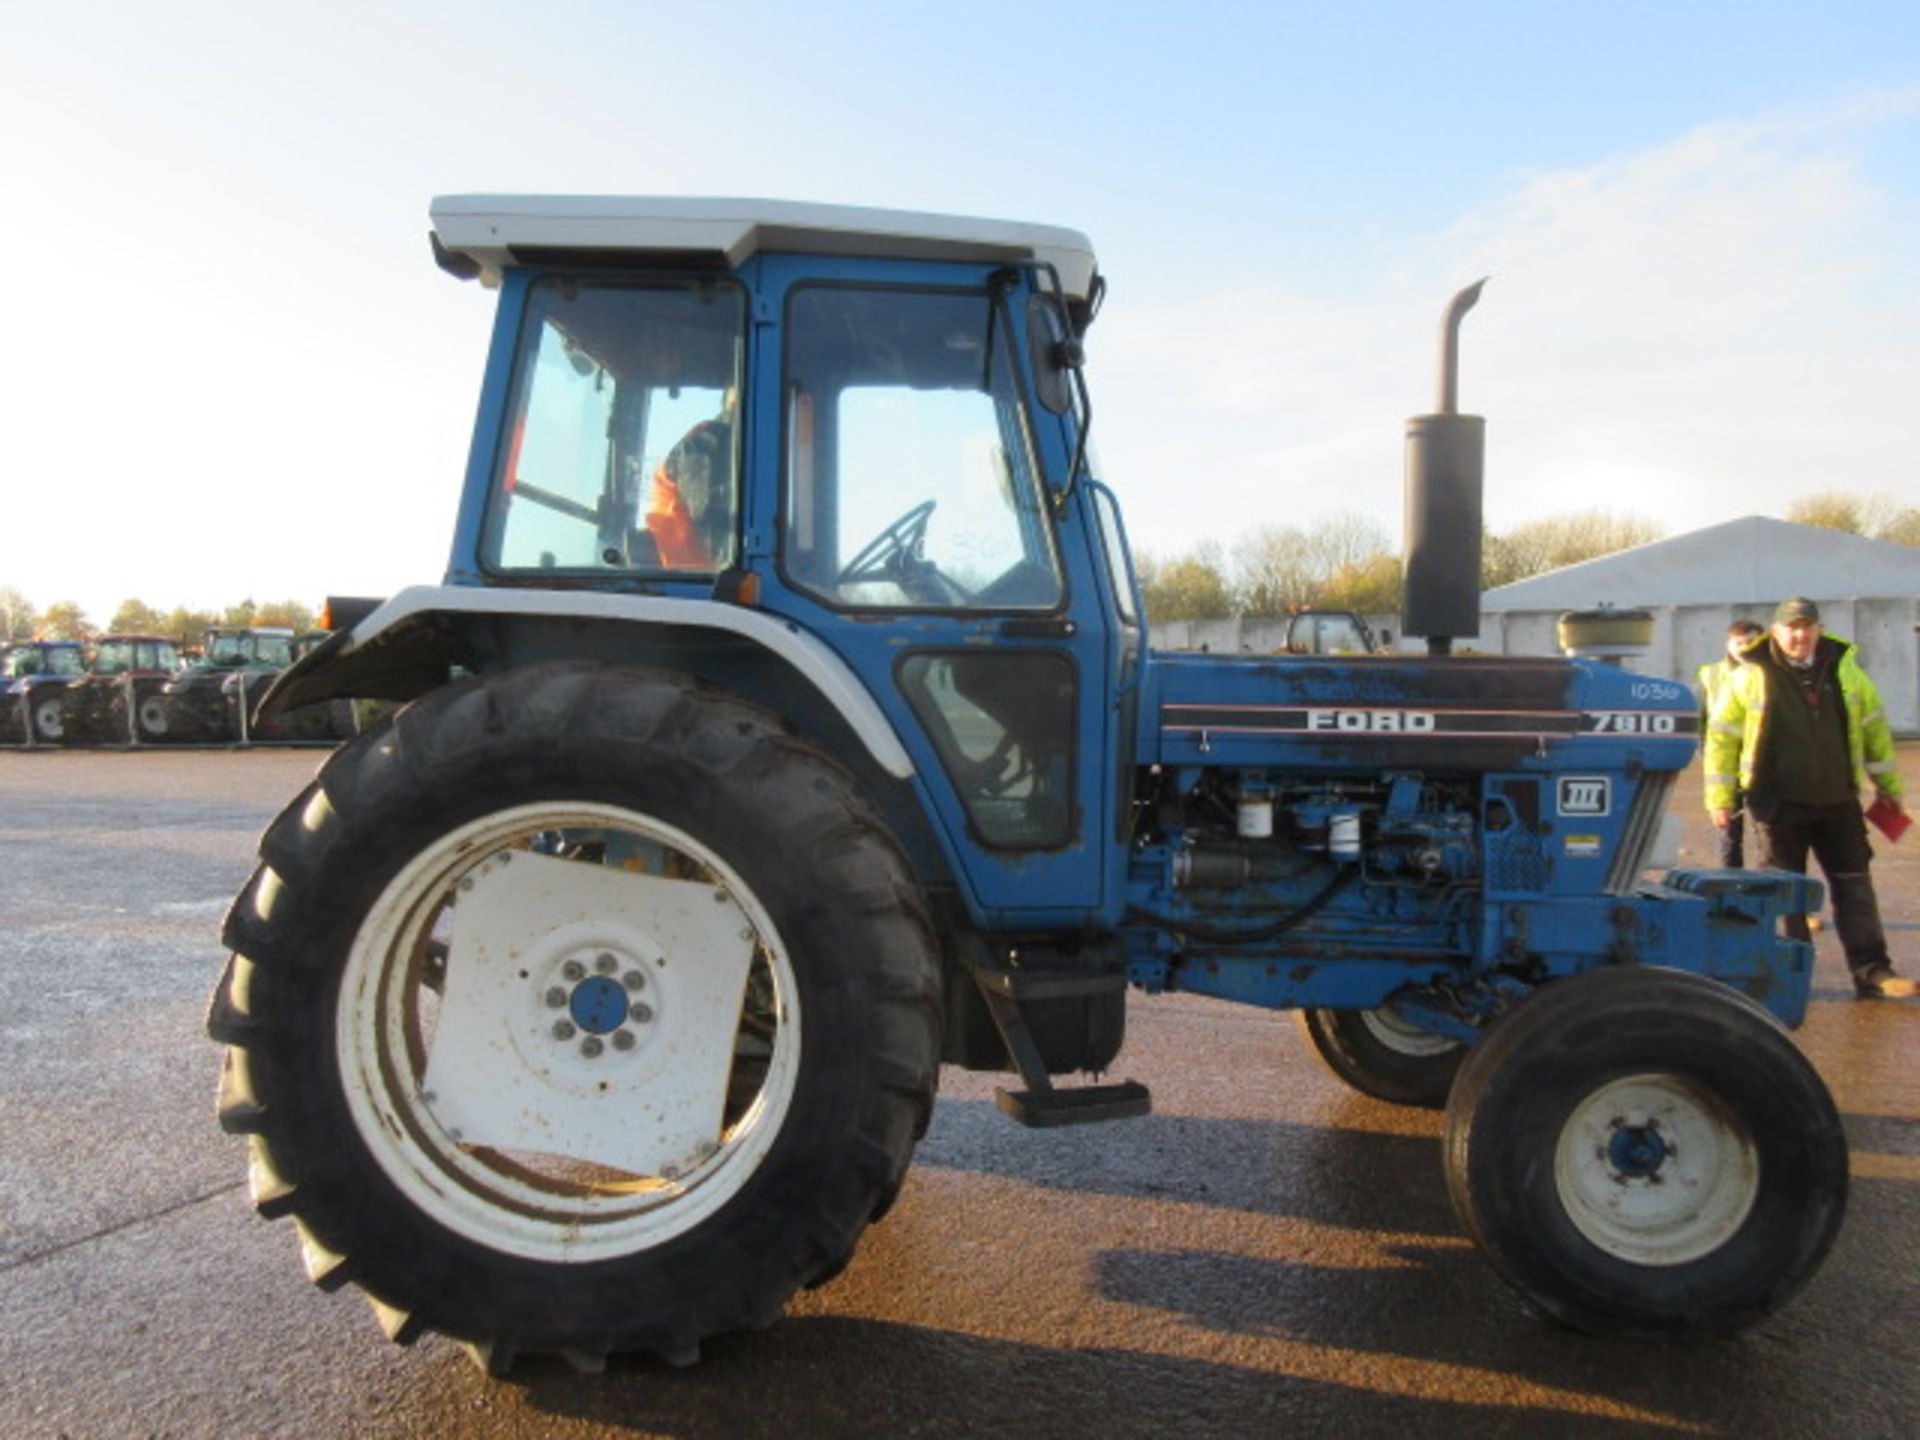 1991 Ford 7810 Series 3 2wd Tractor - Image 4 of 5